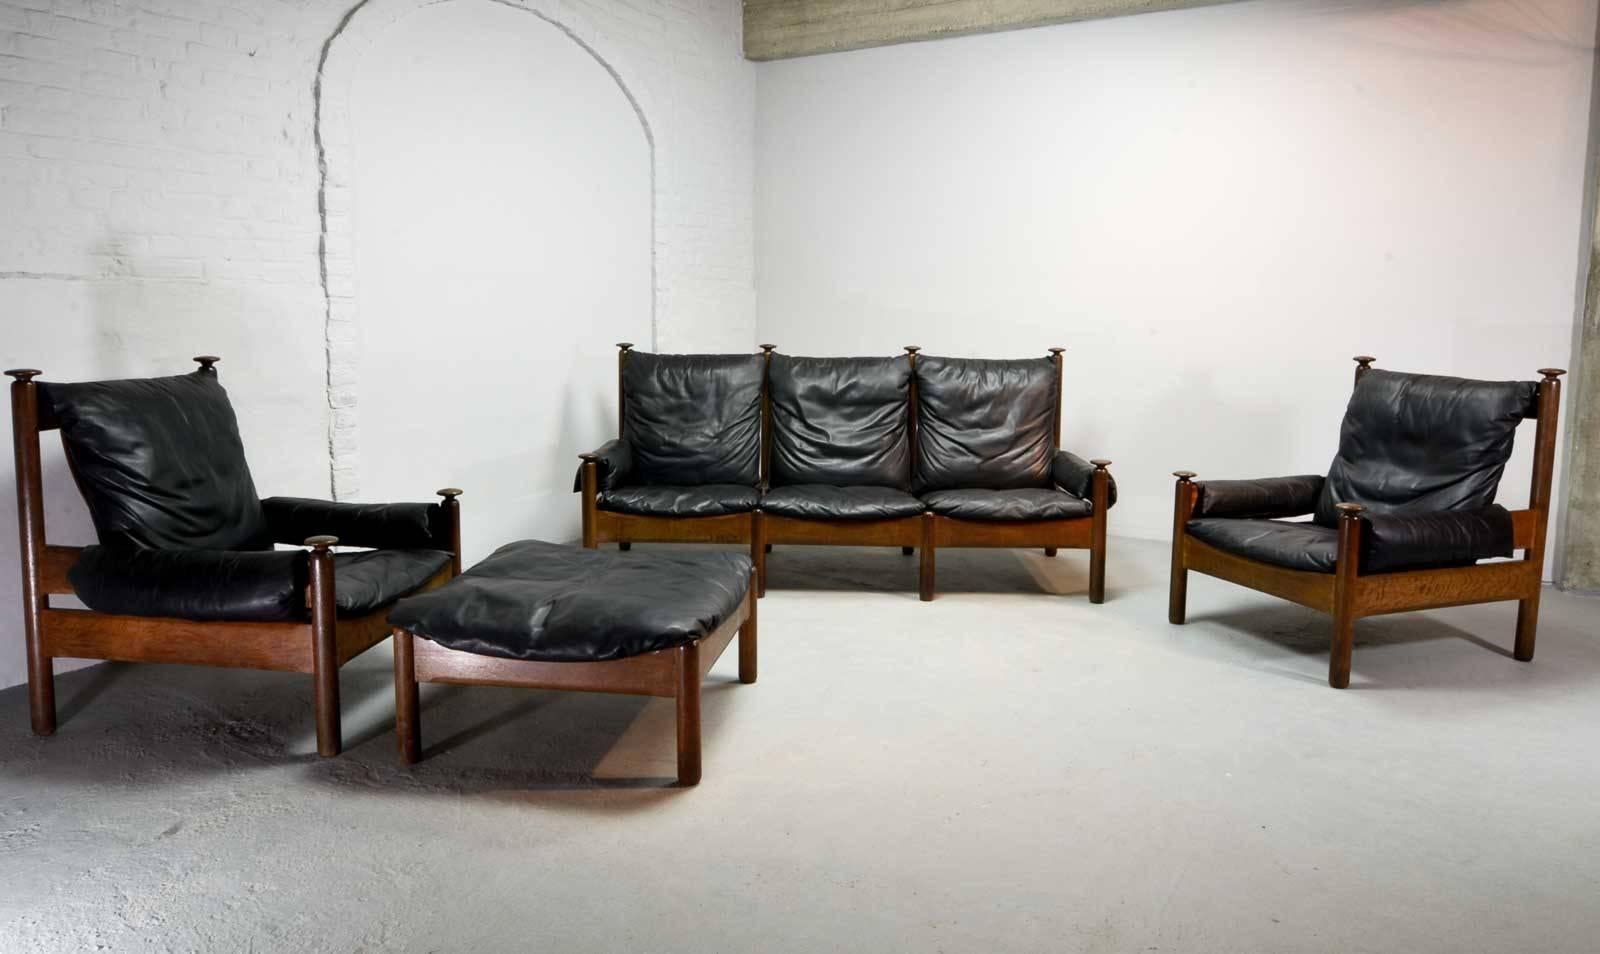 Sturdy midcentury soft black leather Scandinavian sofa set produced in the 1960s in style of the Danish designer Arne Norell. The sofa set features an oak wooden base with knobs and black leather upholstery which is in an overall good condition. The